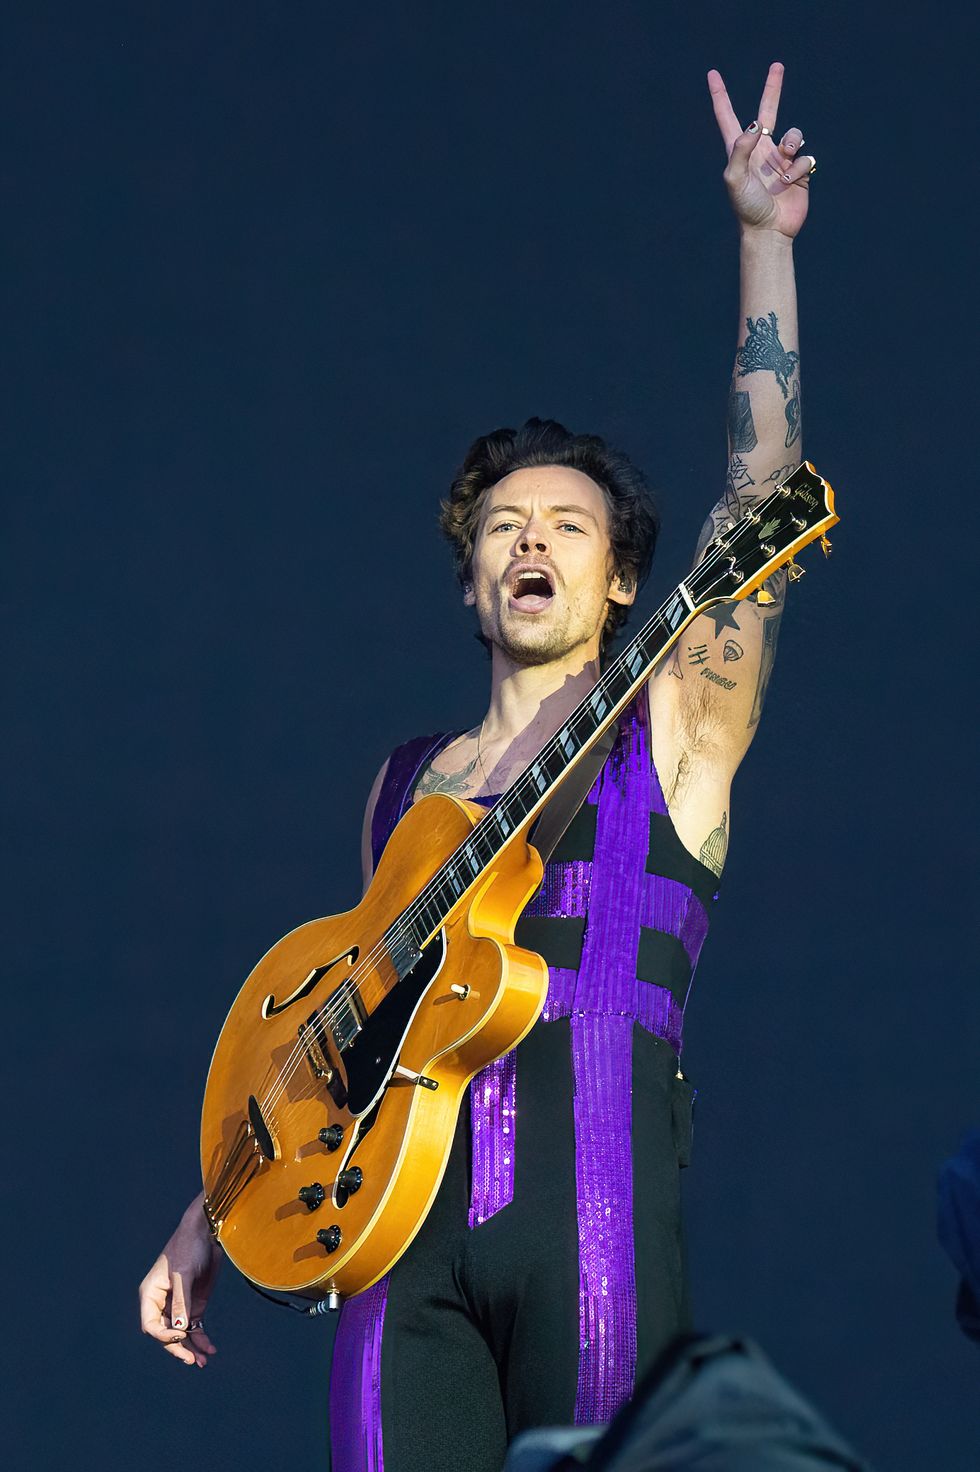 coventry, england may 29 harry styles performs on the main stage at war memorial park on may 29, 2022 in coventry, england photo by joseph okpakowireimage